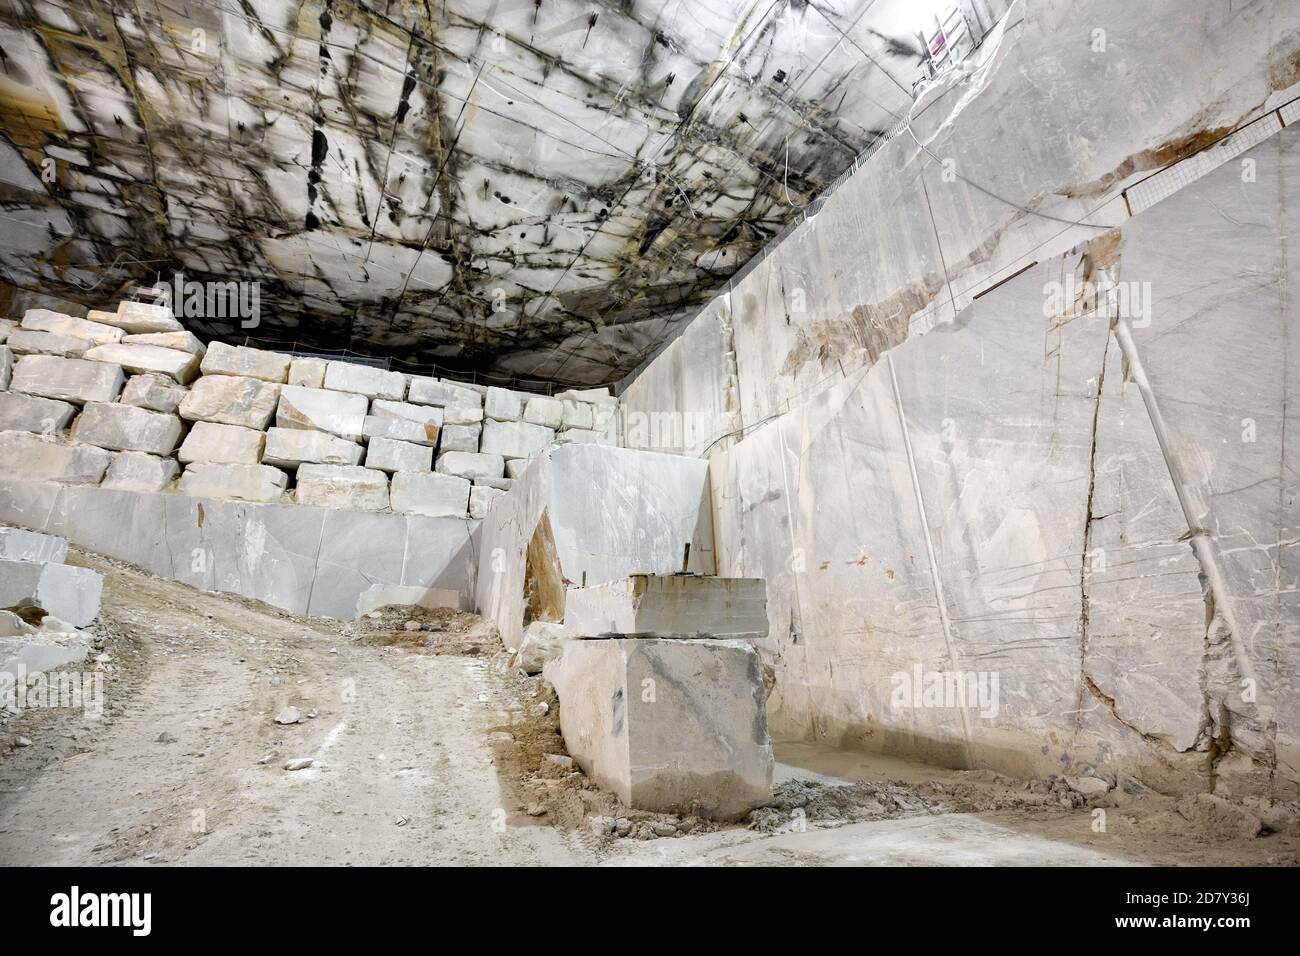 Panorama view of the rock face and cut blocks of marble in an open cast quarry or mine in Carrara, Tuscany, Italy during extraction of the rock from a Stock Photo